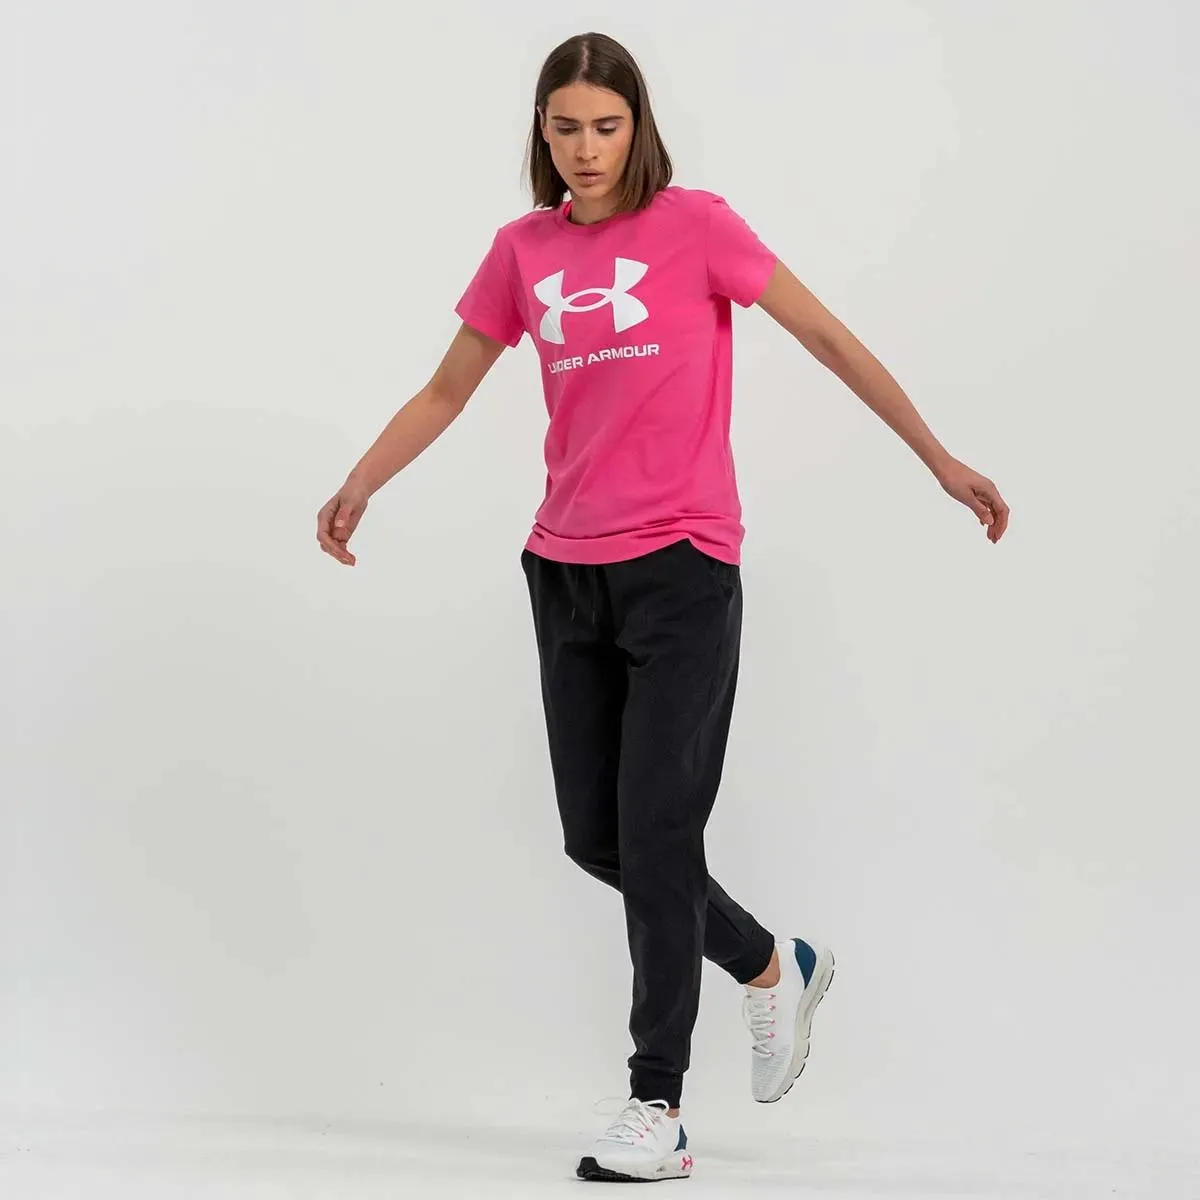 Under Armour Sportstyle Graphic 